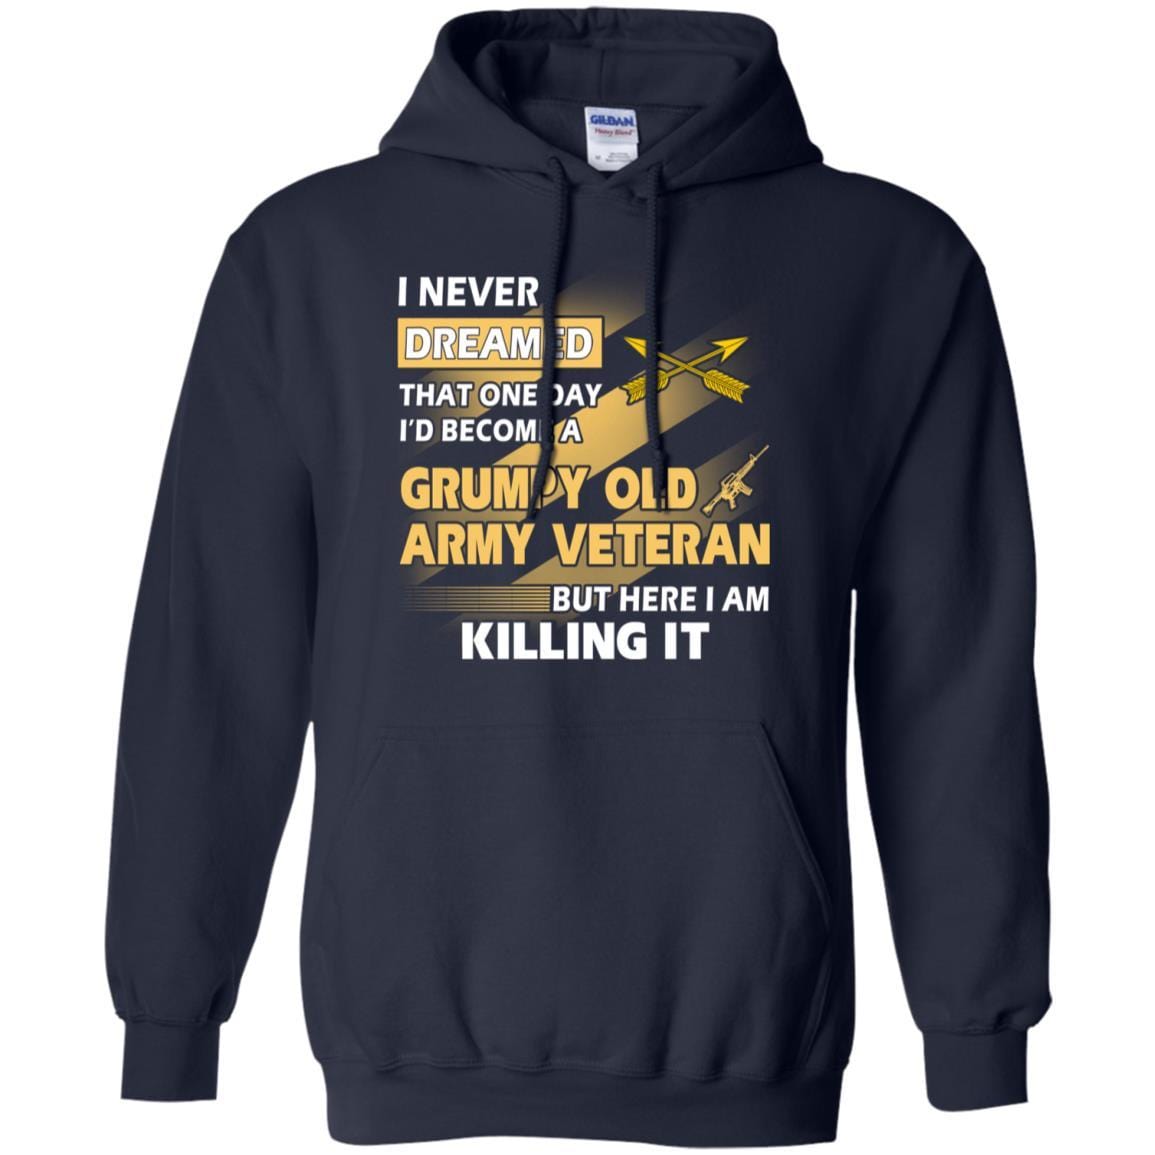 US Army T-Shirt "Special Forces (USASFC) Grumpy Old Veteran" On Front-TShirt-Army-Veterans Nation